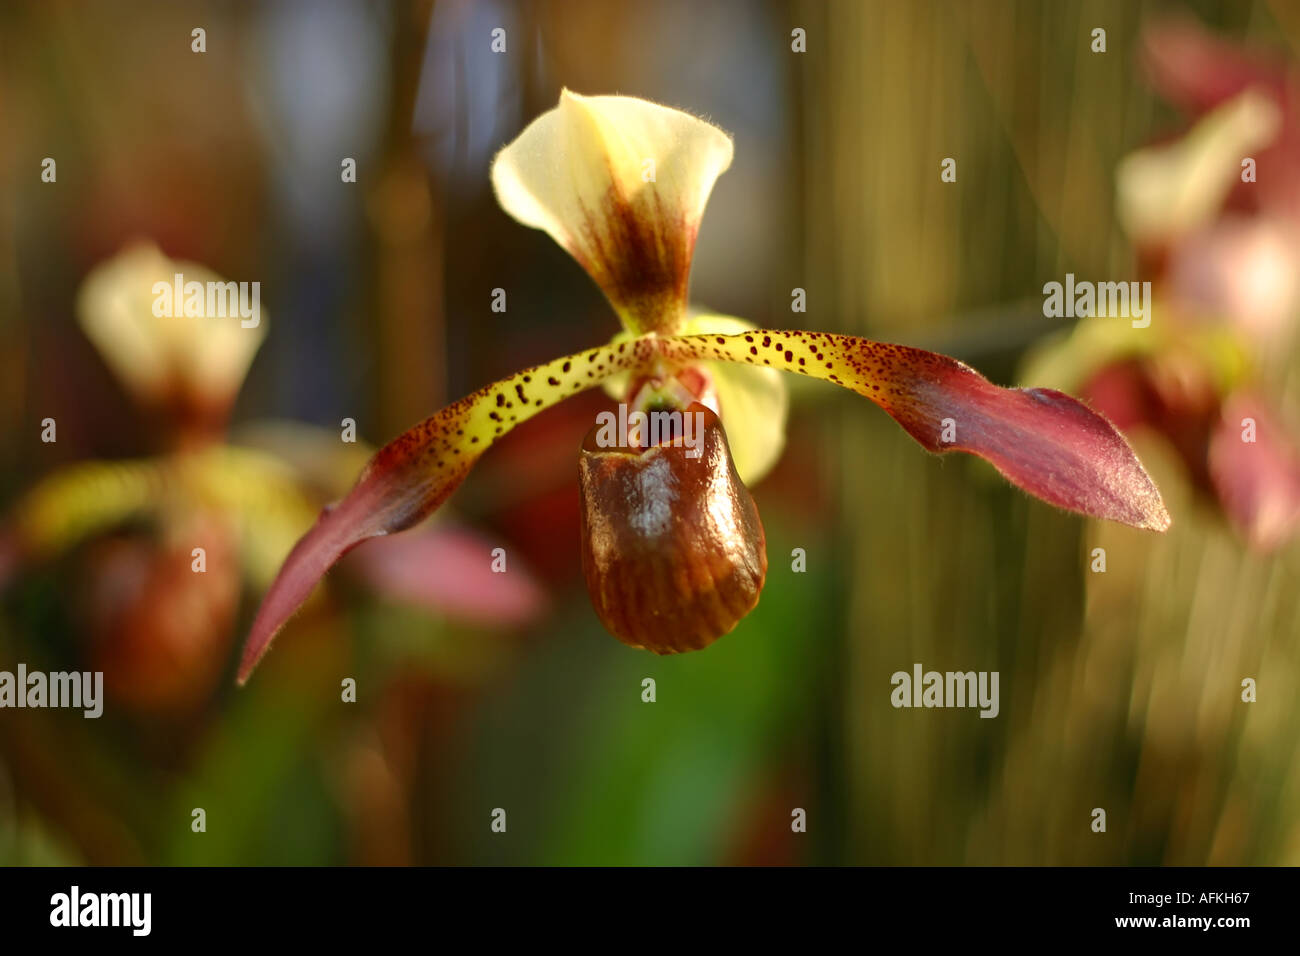 Paphiopedilum orchid flower Spotted lemon yellow and burdundy Stock Photo